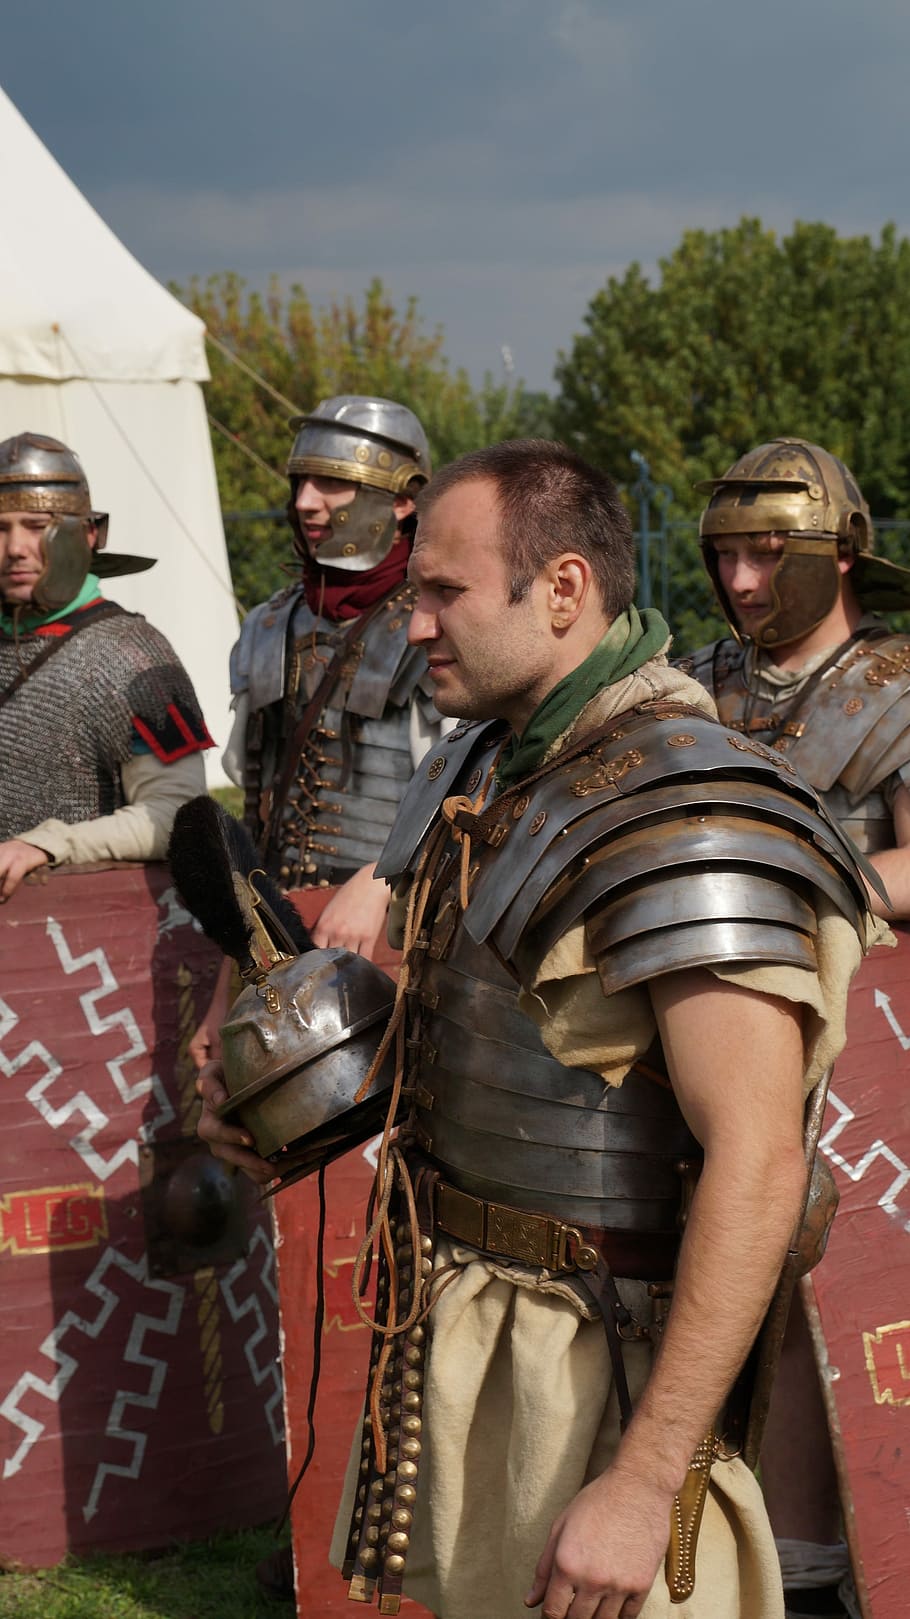 Romans, Man, Person, Fighter, romans legionaries, historical reconstruction, historical events, helmet, standing, togetherness